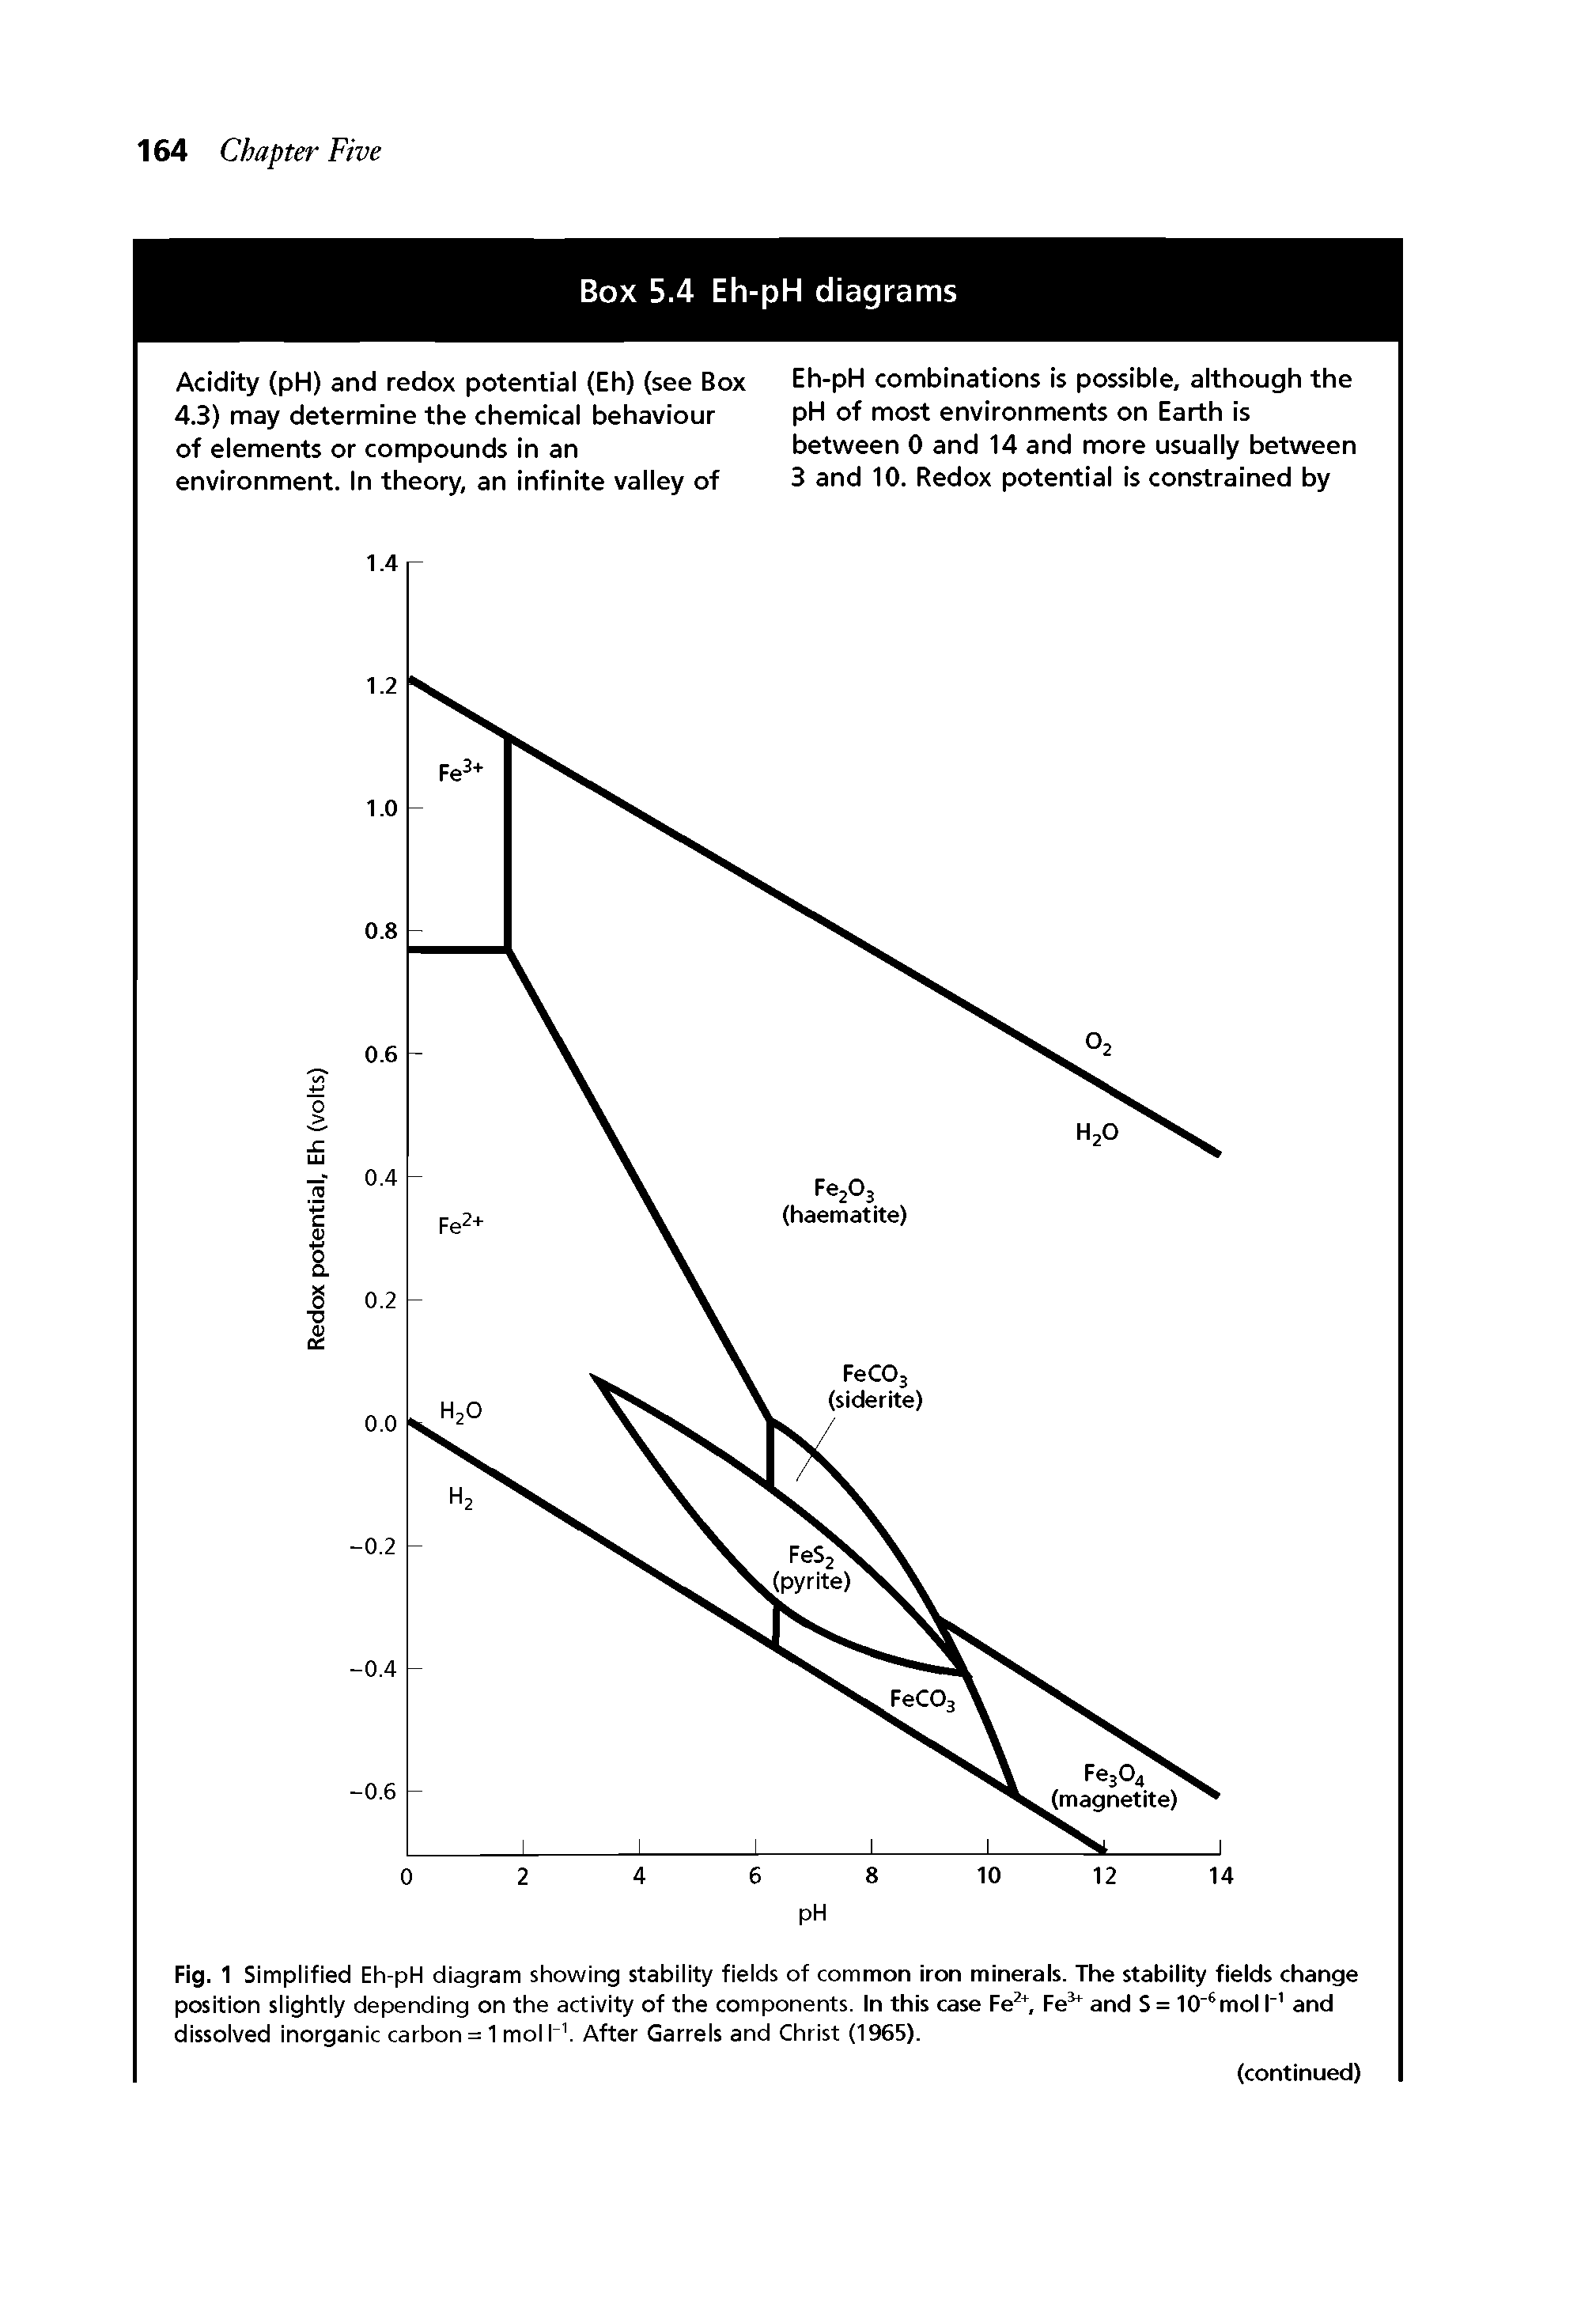 Fig. 1 Simplified Eh-pH diagram showing stability fields of common iron minerals. The stability fields change position slightly depending on the activity of the components. In this case Fe2+, Fe1 and S = 10"6mol I" and dissolved inorganic carbon = 1 mol K After Garrels and Christ (1965).